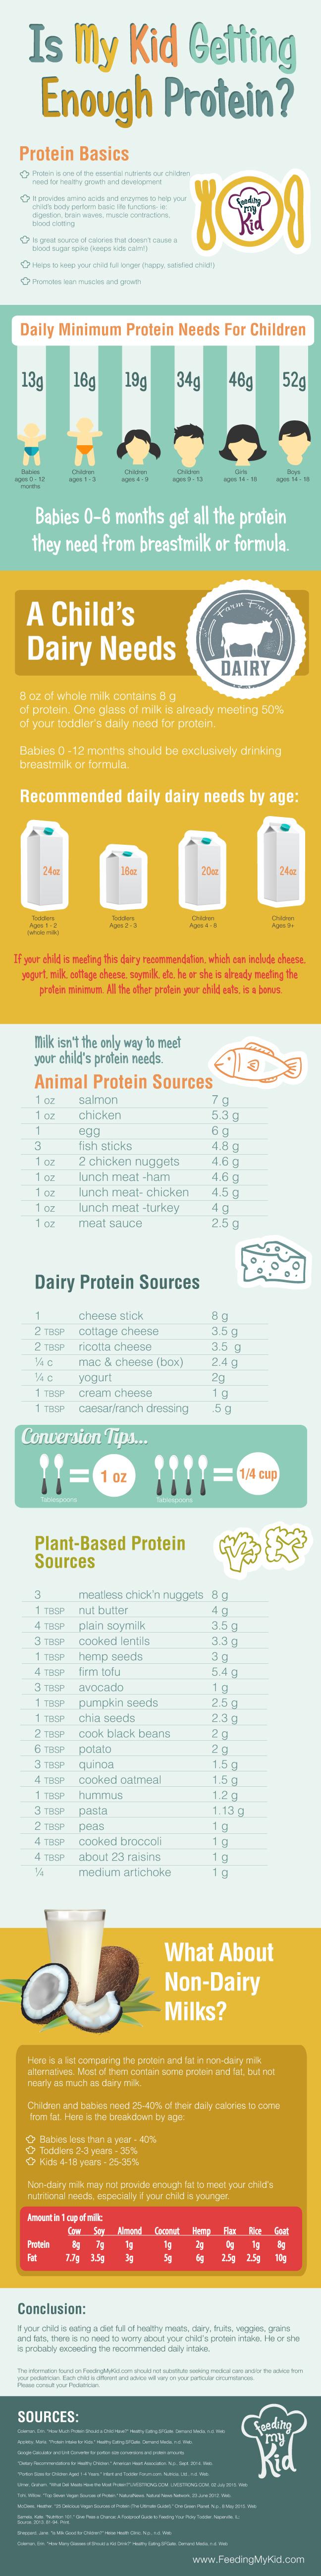 Is My Kid Getting Enough Protein INFOGRAPHIC from Feeding My Kid. Protein for Kids, Protein for Toddlers, Children Nutrition 